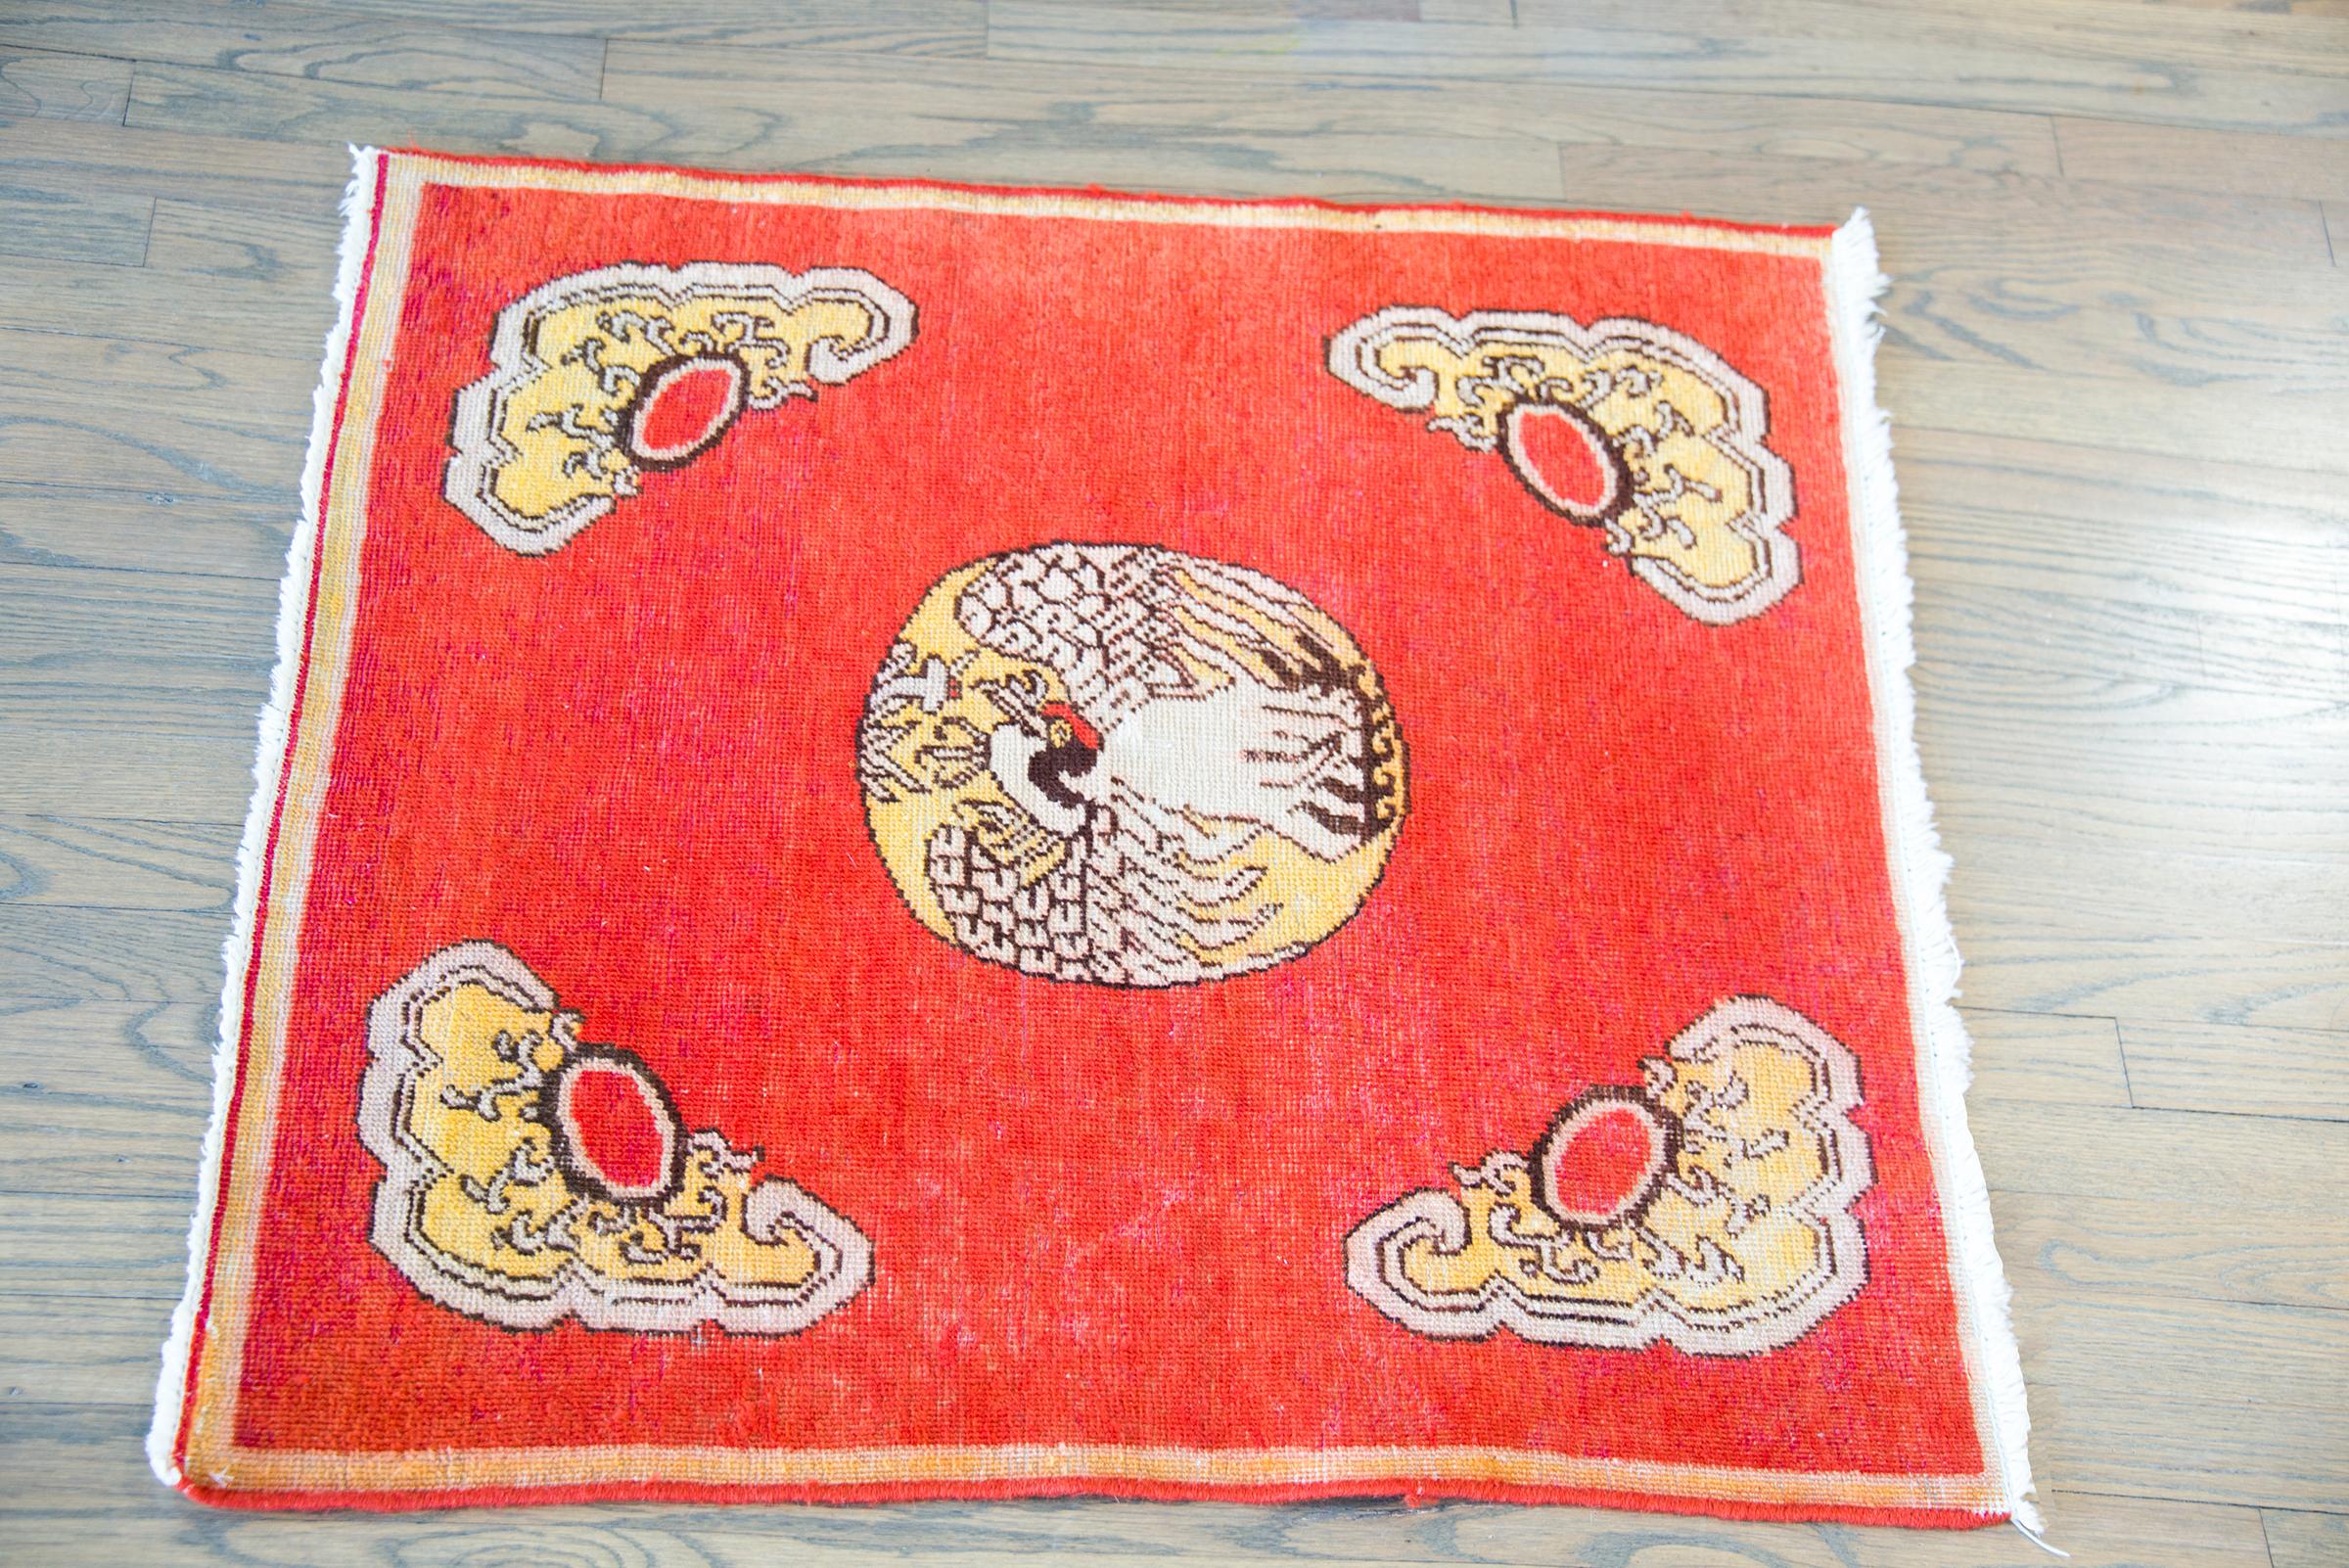 A charming early 20th century Central Asian Khotan rug styled after a traditional Chinese Rank Badge, with a large swan in the center with cloud-form shapes in each corner, and all set against a traditional Khotan orange background.